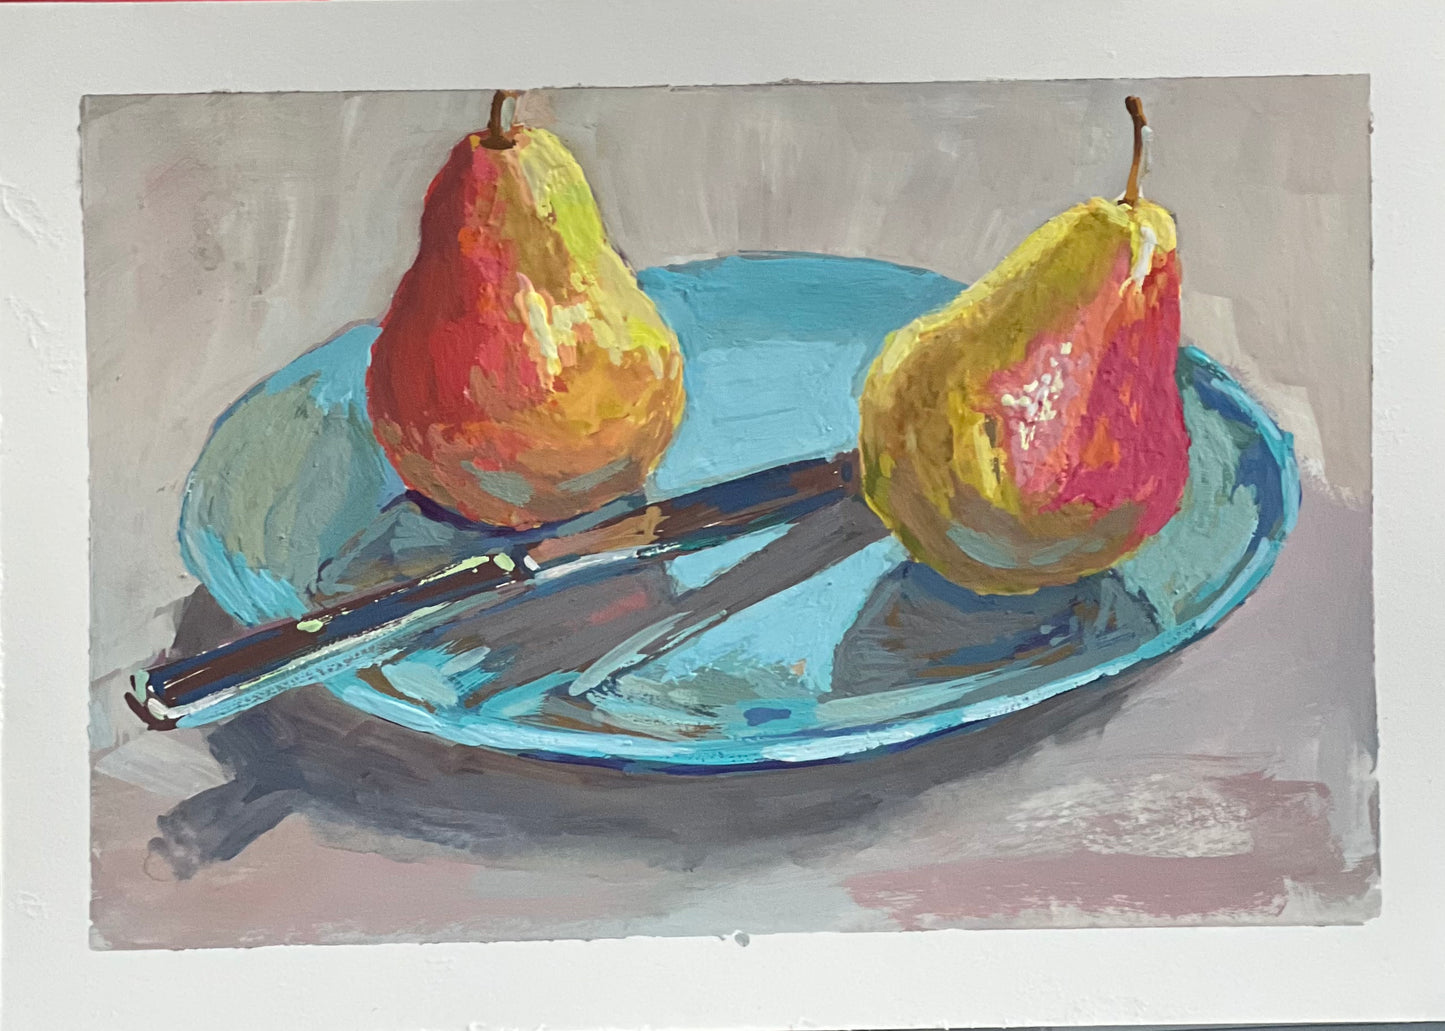 Pears on blue plate - Gouache painting